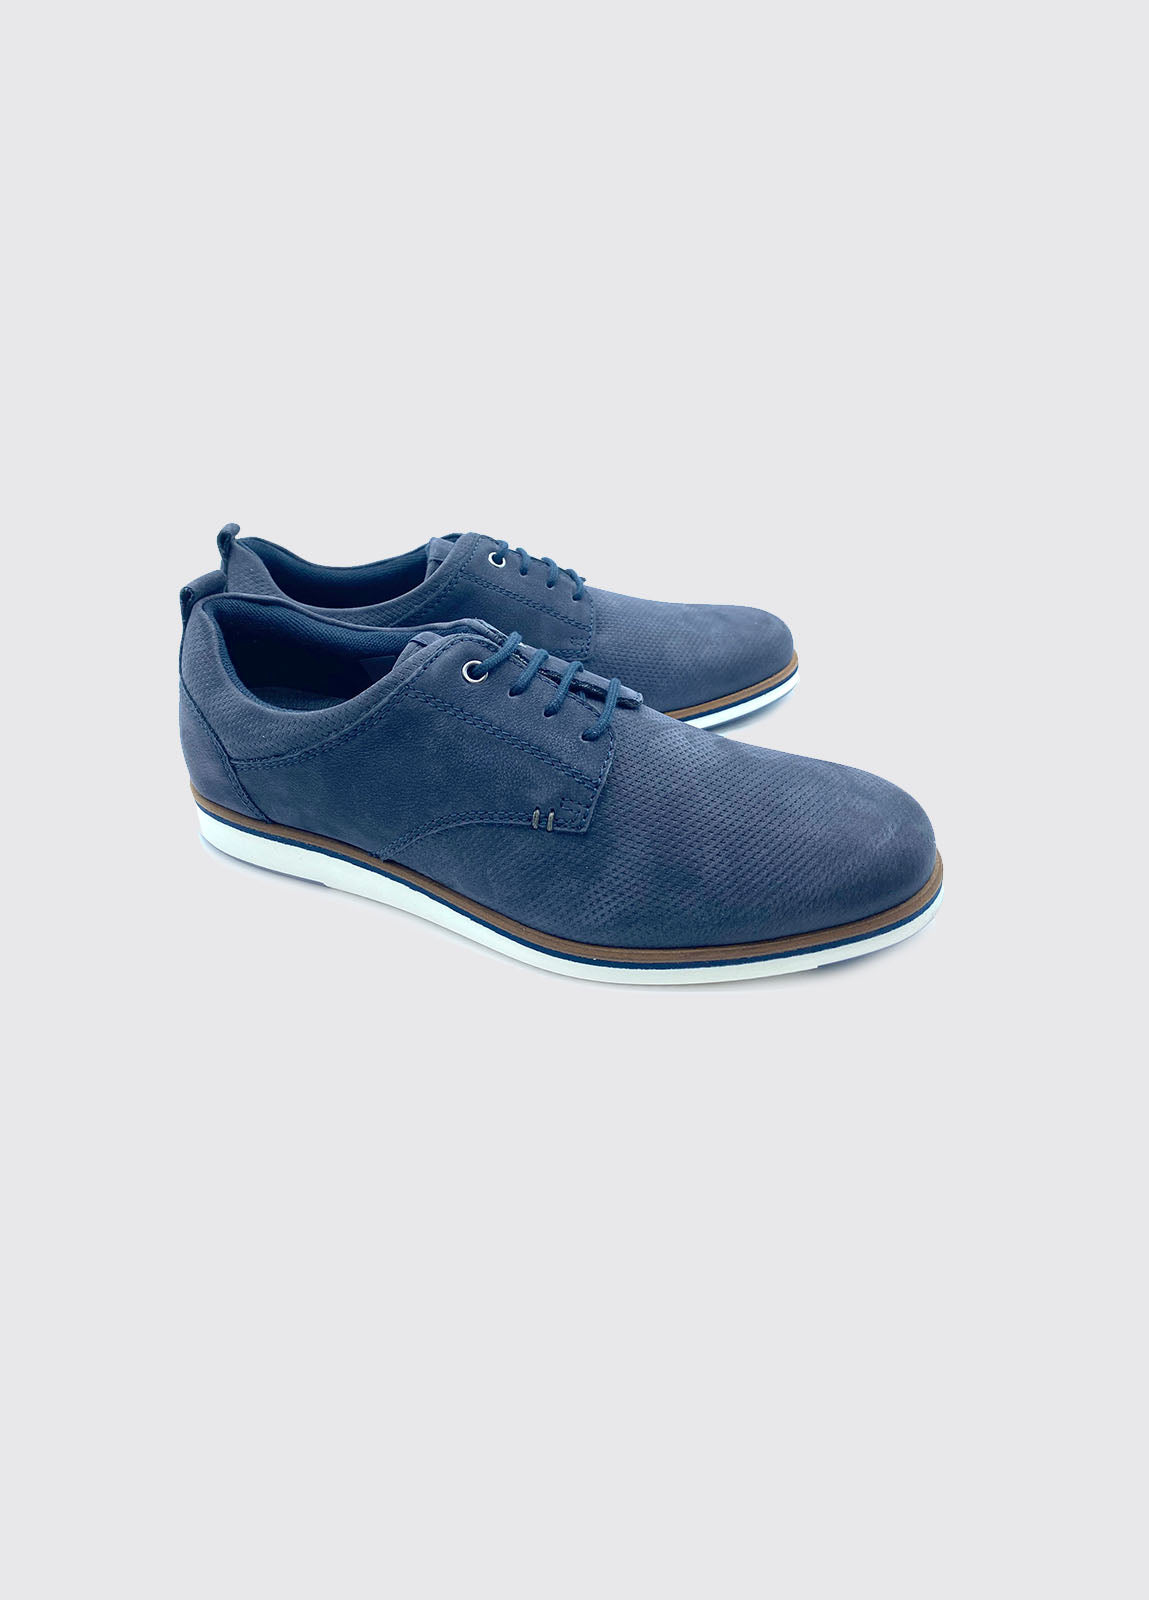 Stafford Navy Mens Leather Shoe